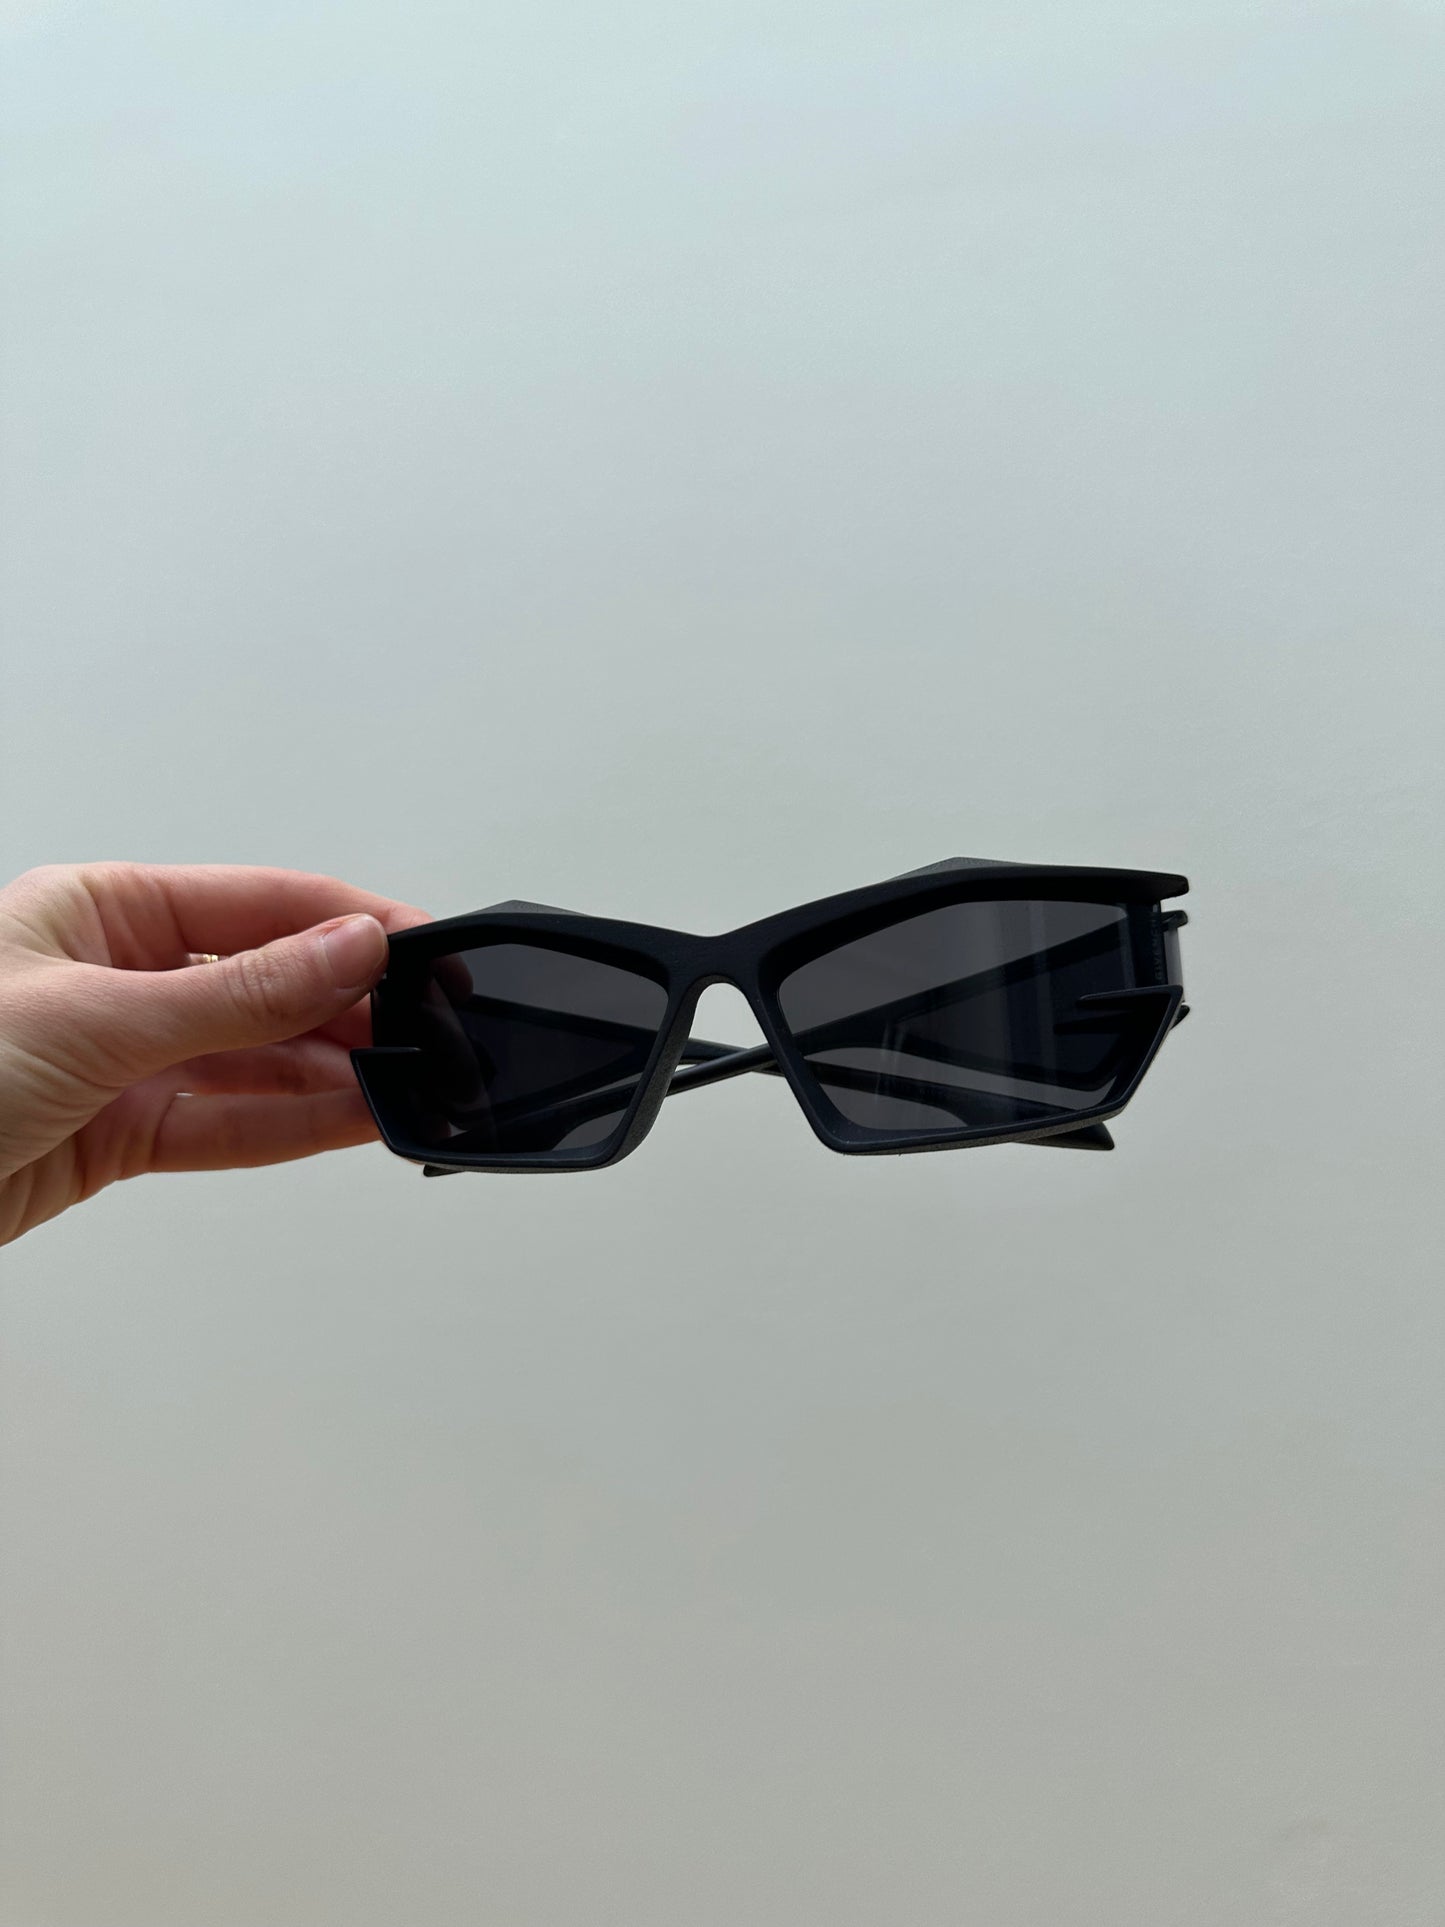 GIVENCHY cut out sunglasses